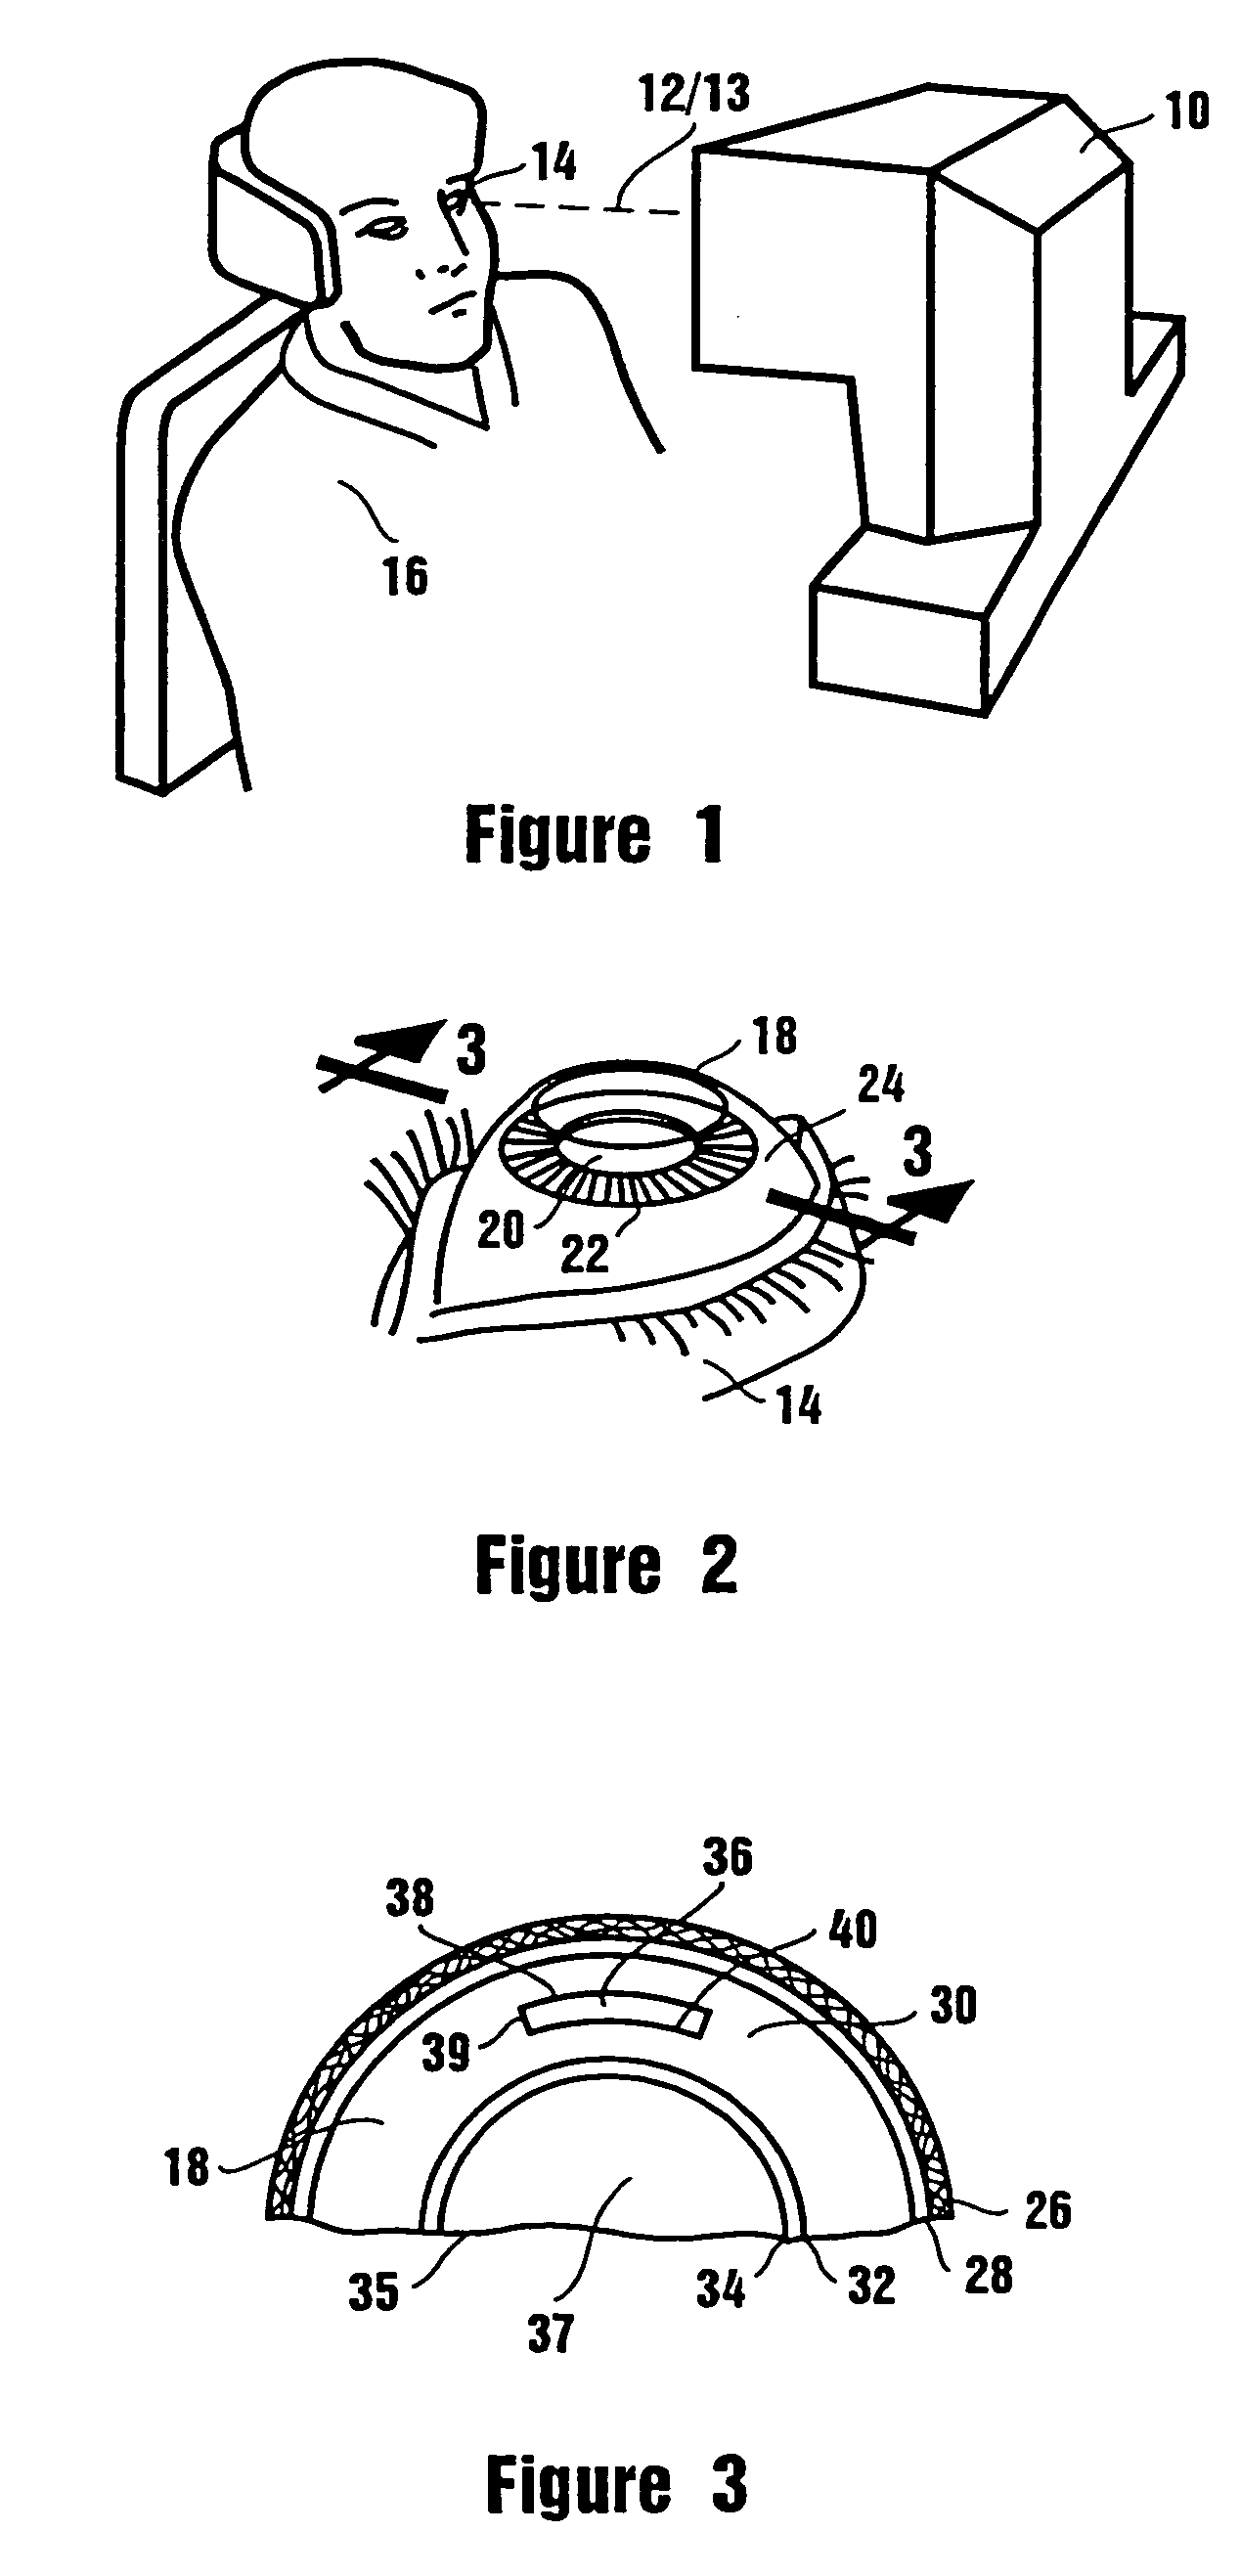 Method of corneal surgery by laser incising a contoured corneal flap